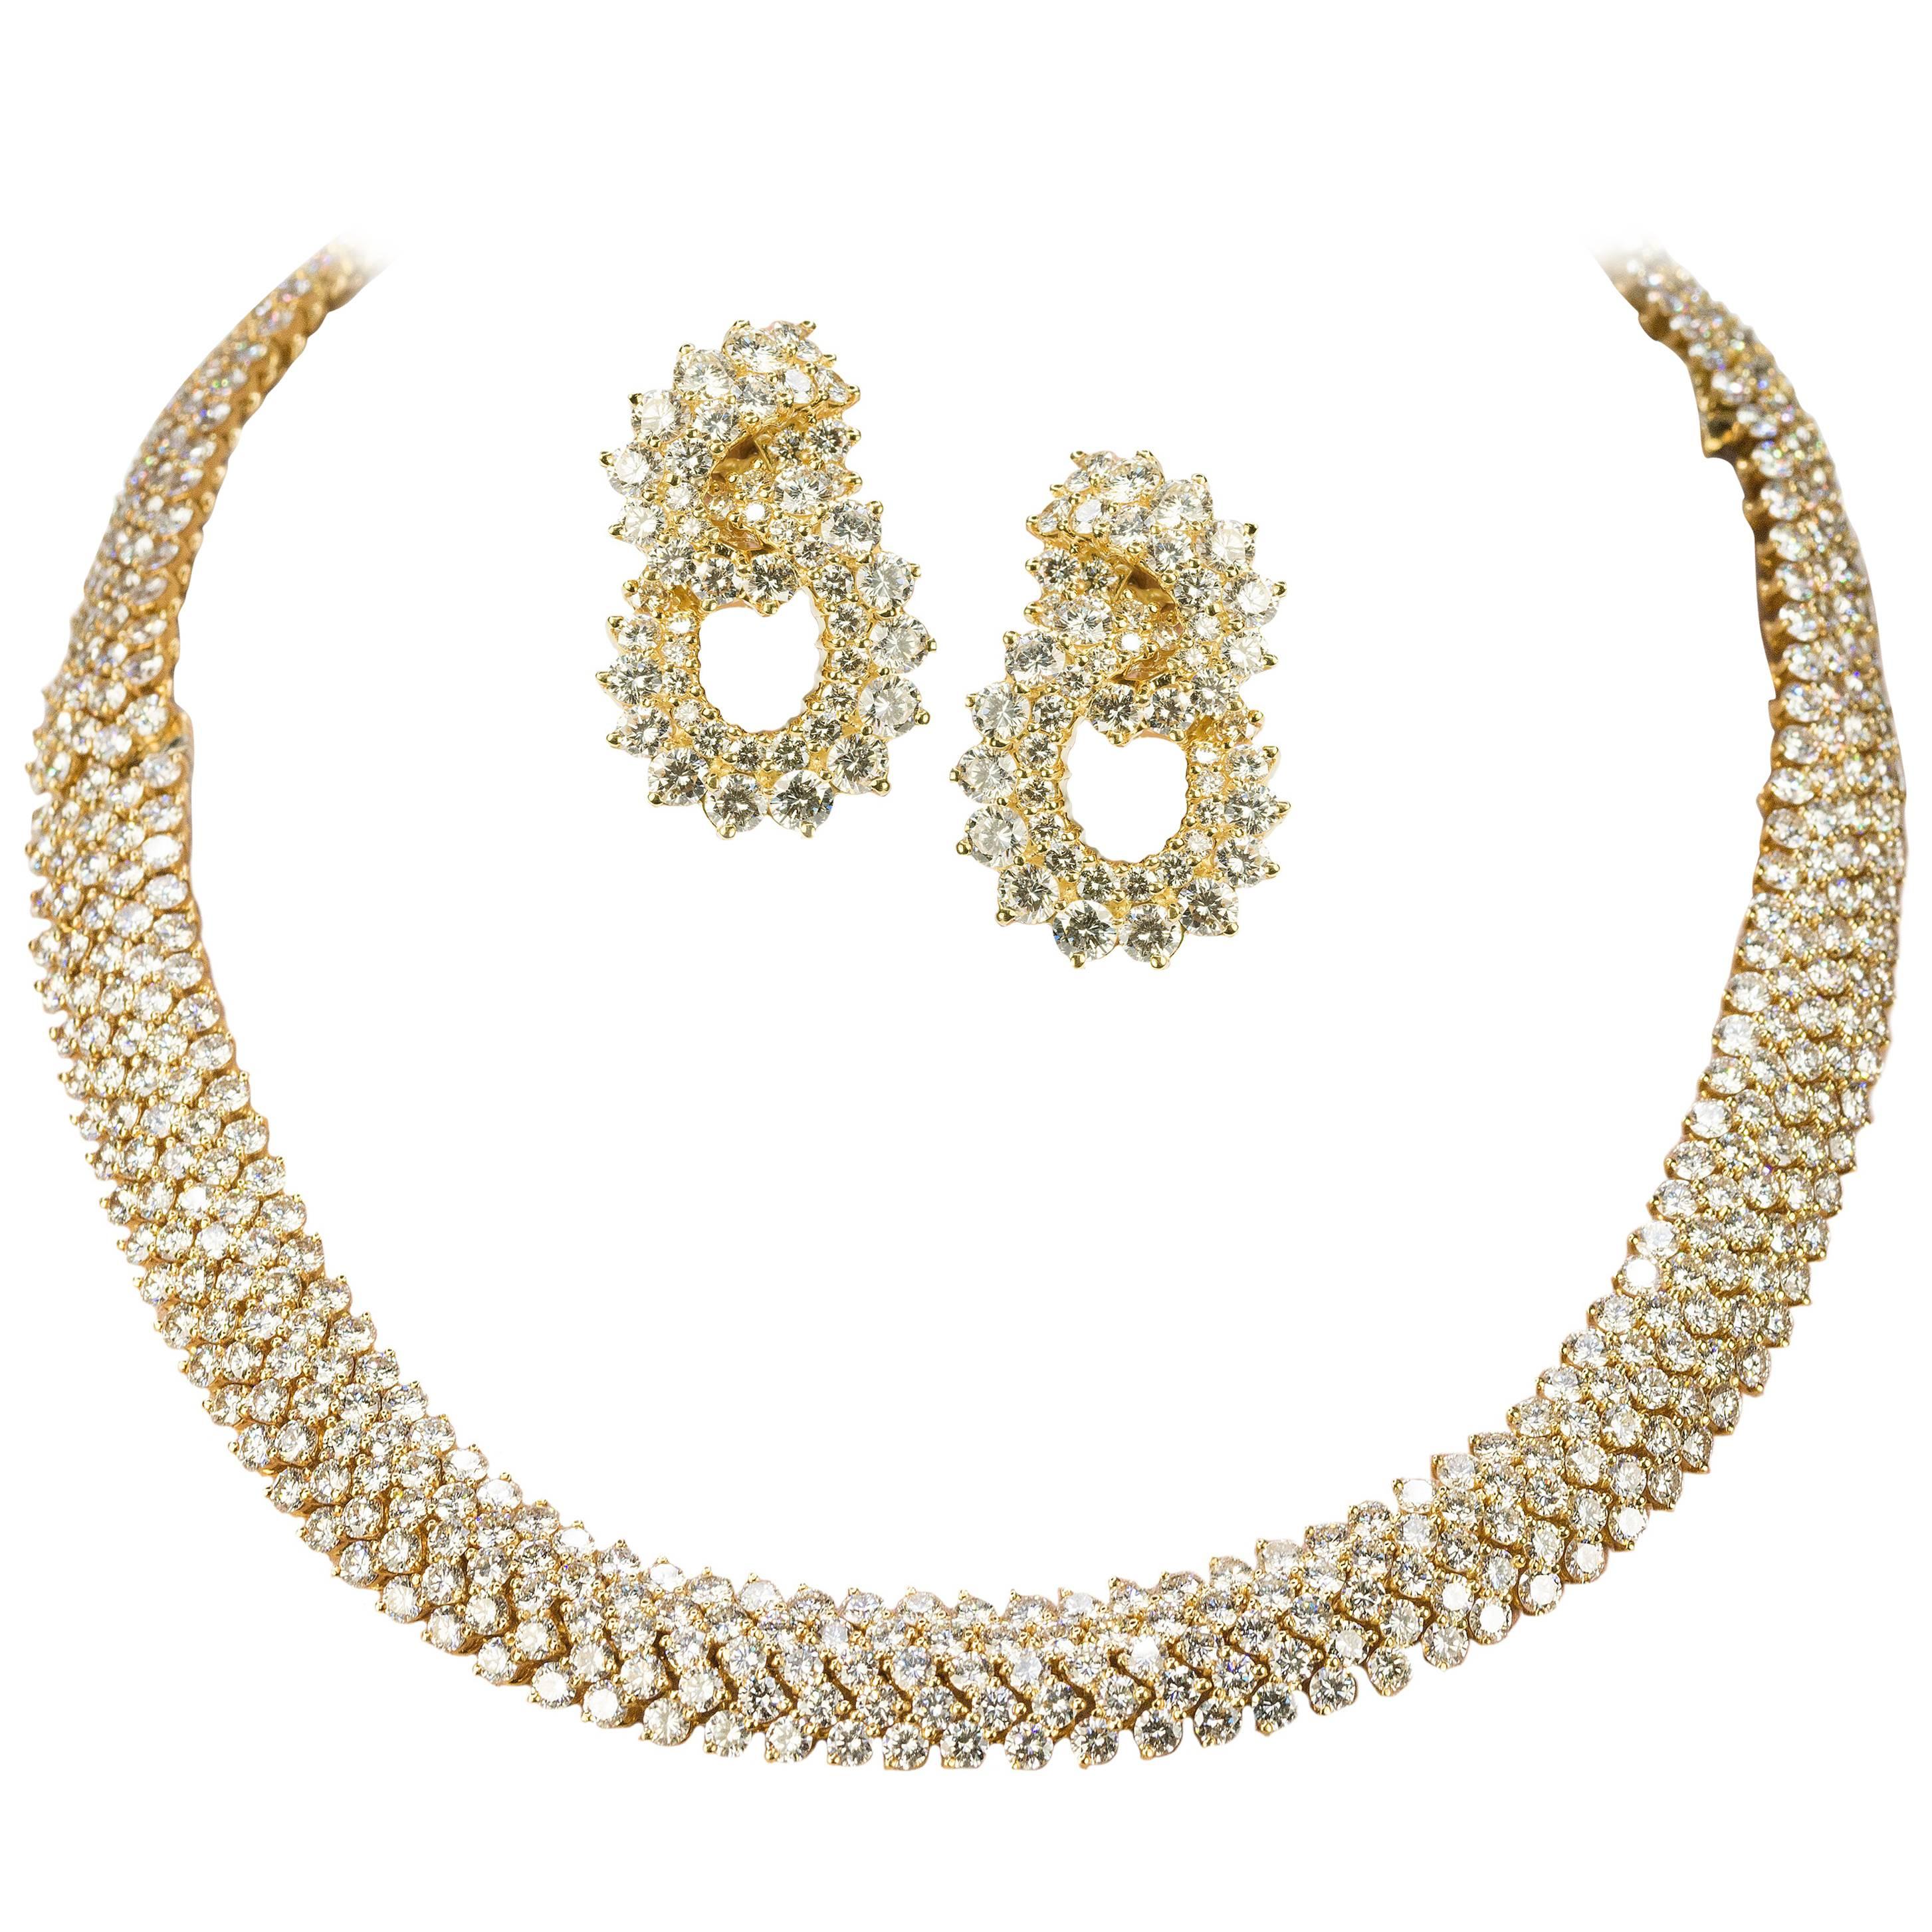 Kwiat Diamond Gold Necklace and Earring Suite